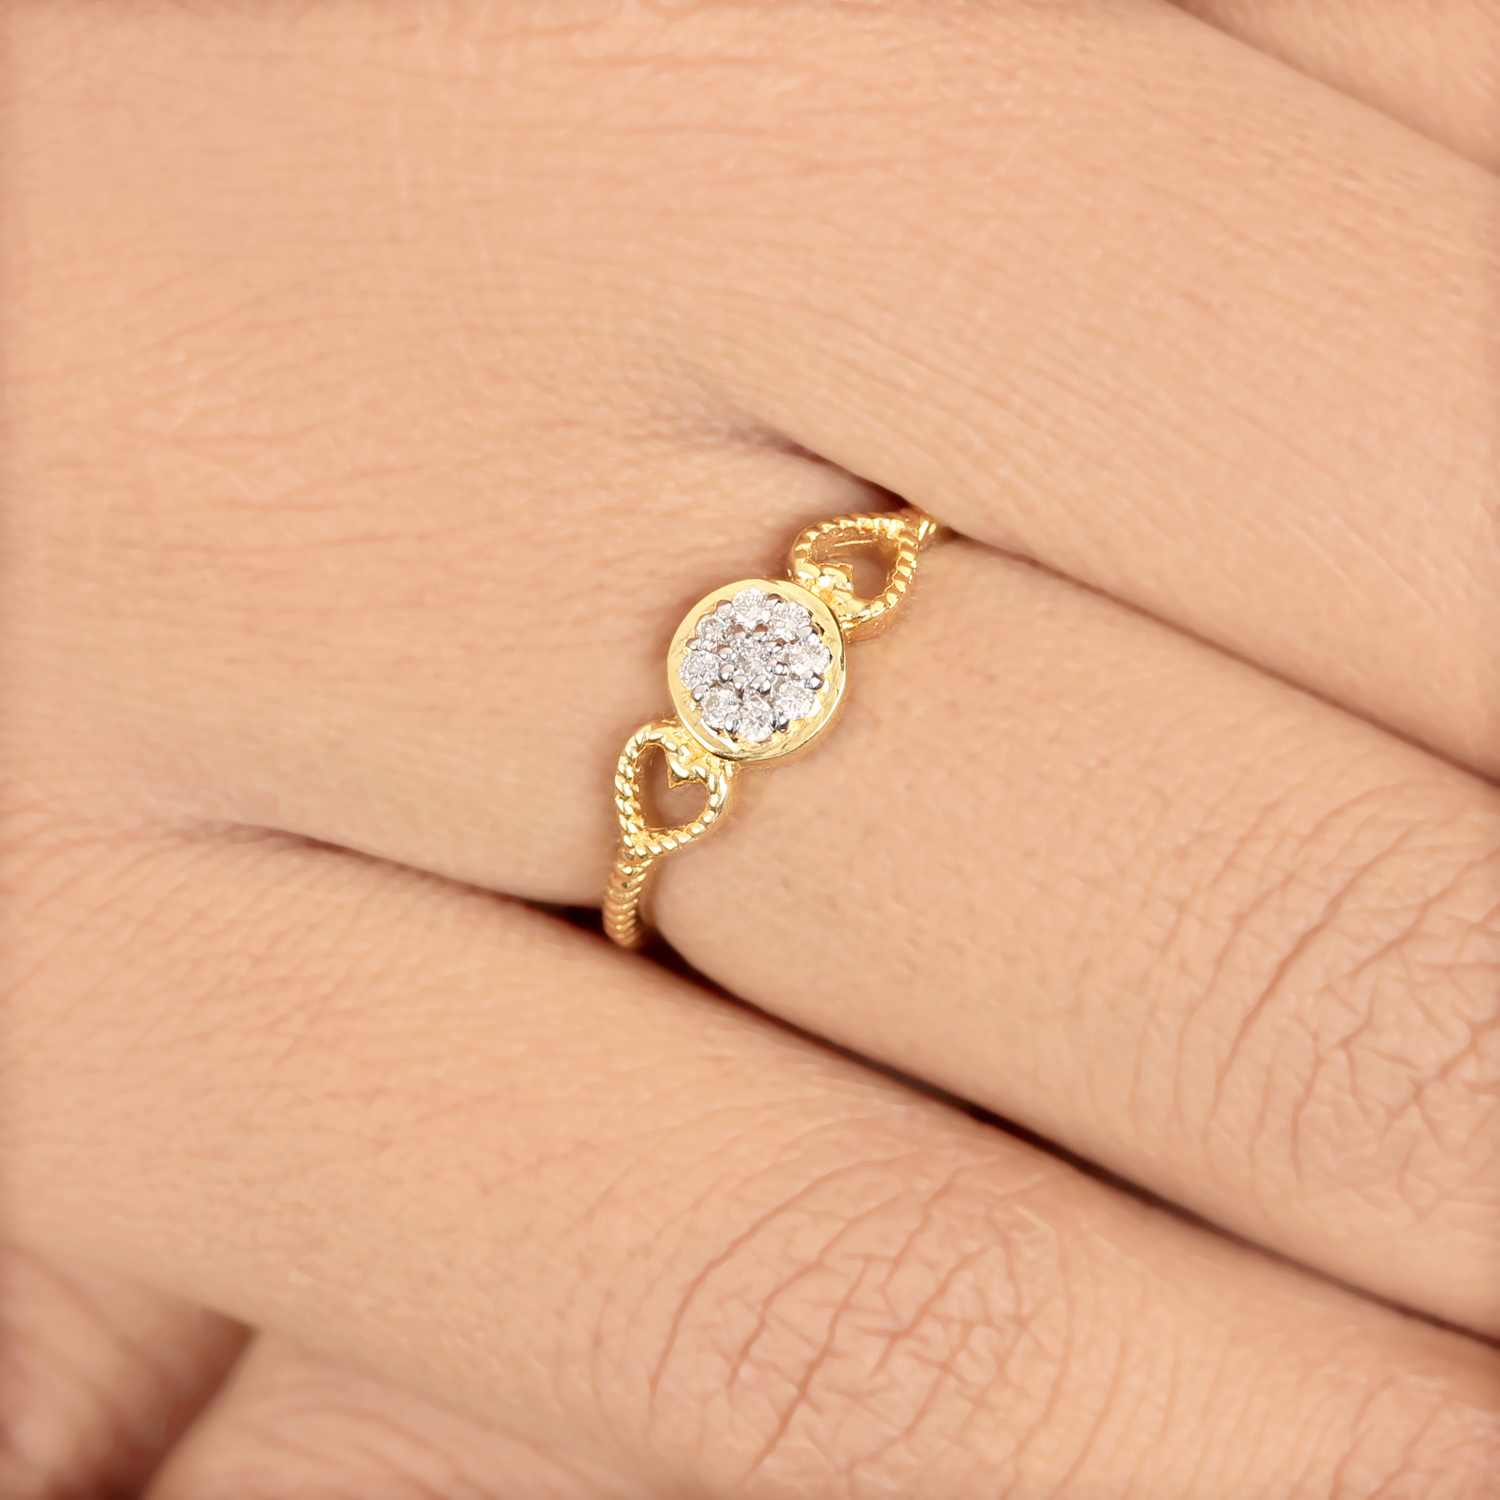 Pretty Ring With Gold & Diamond